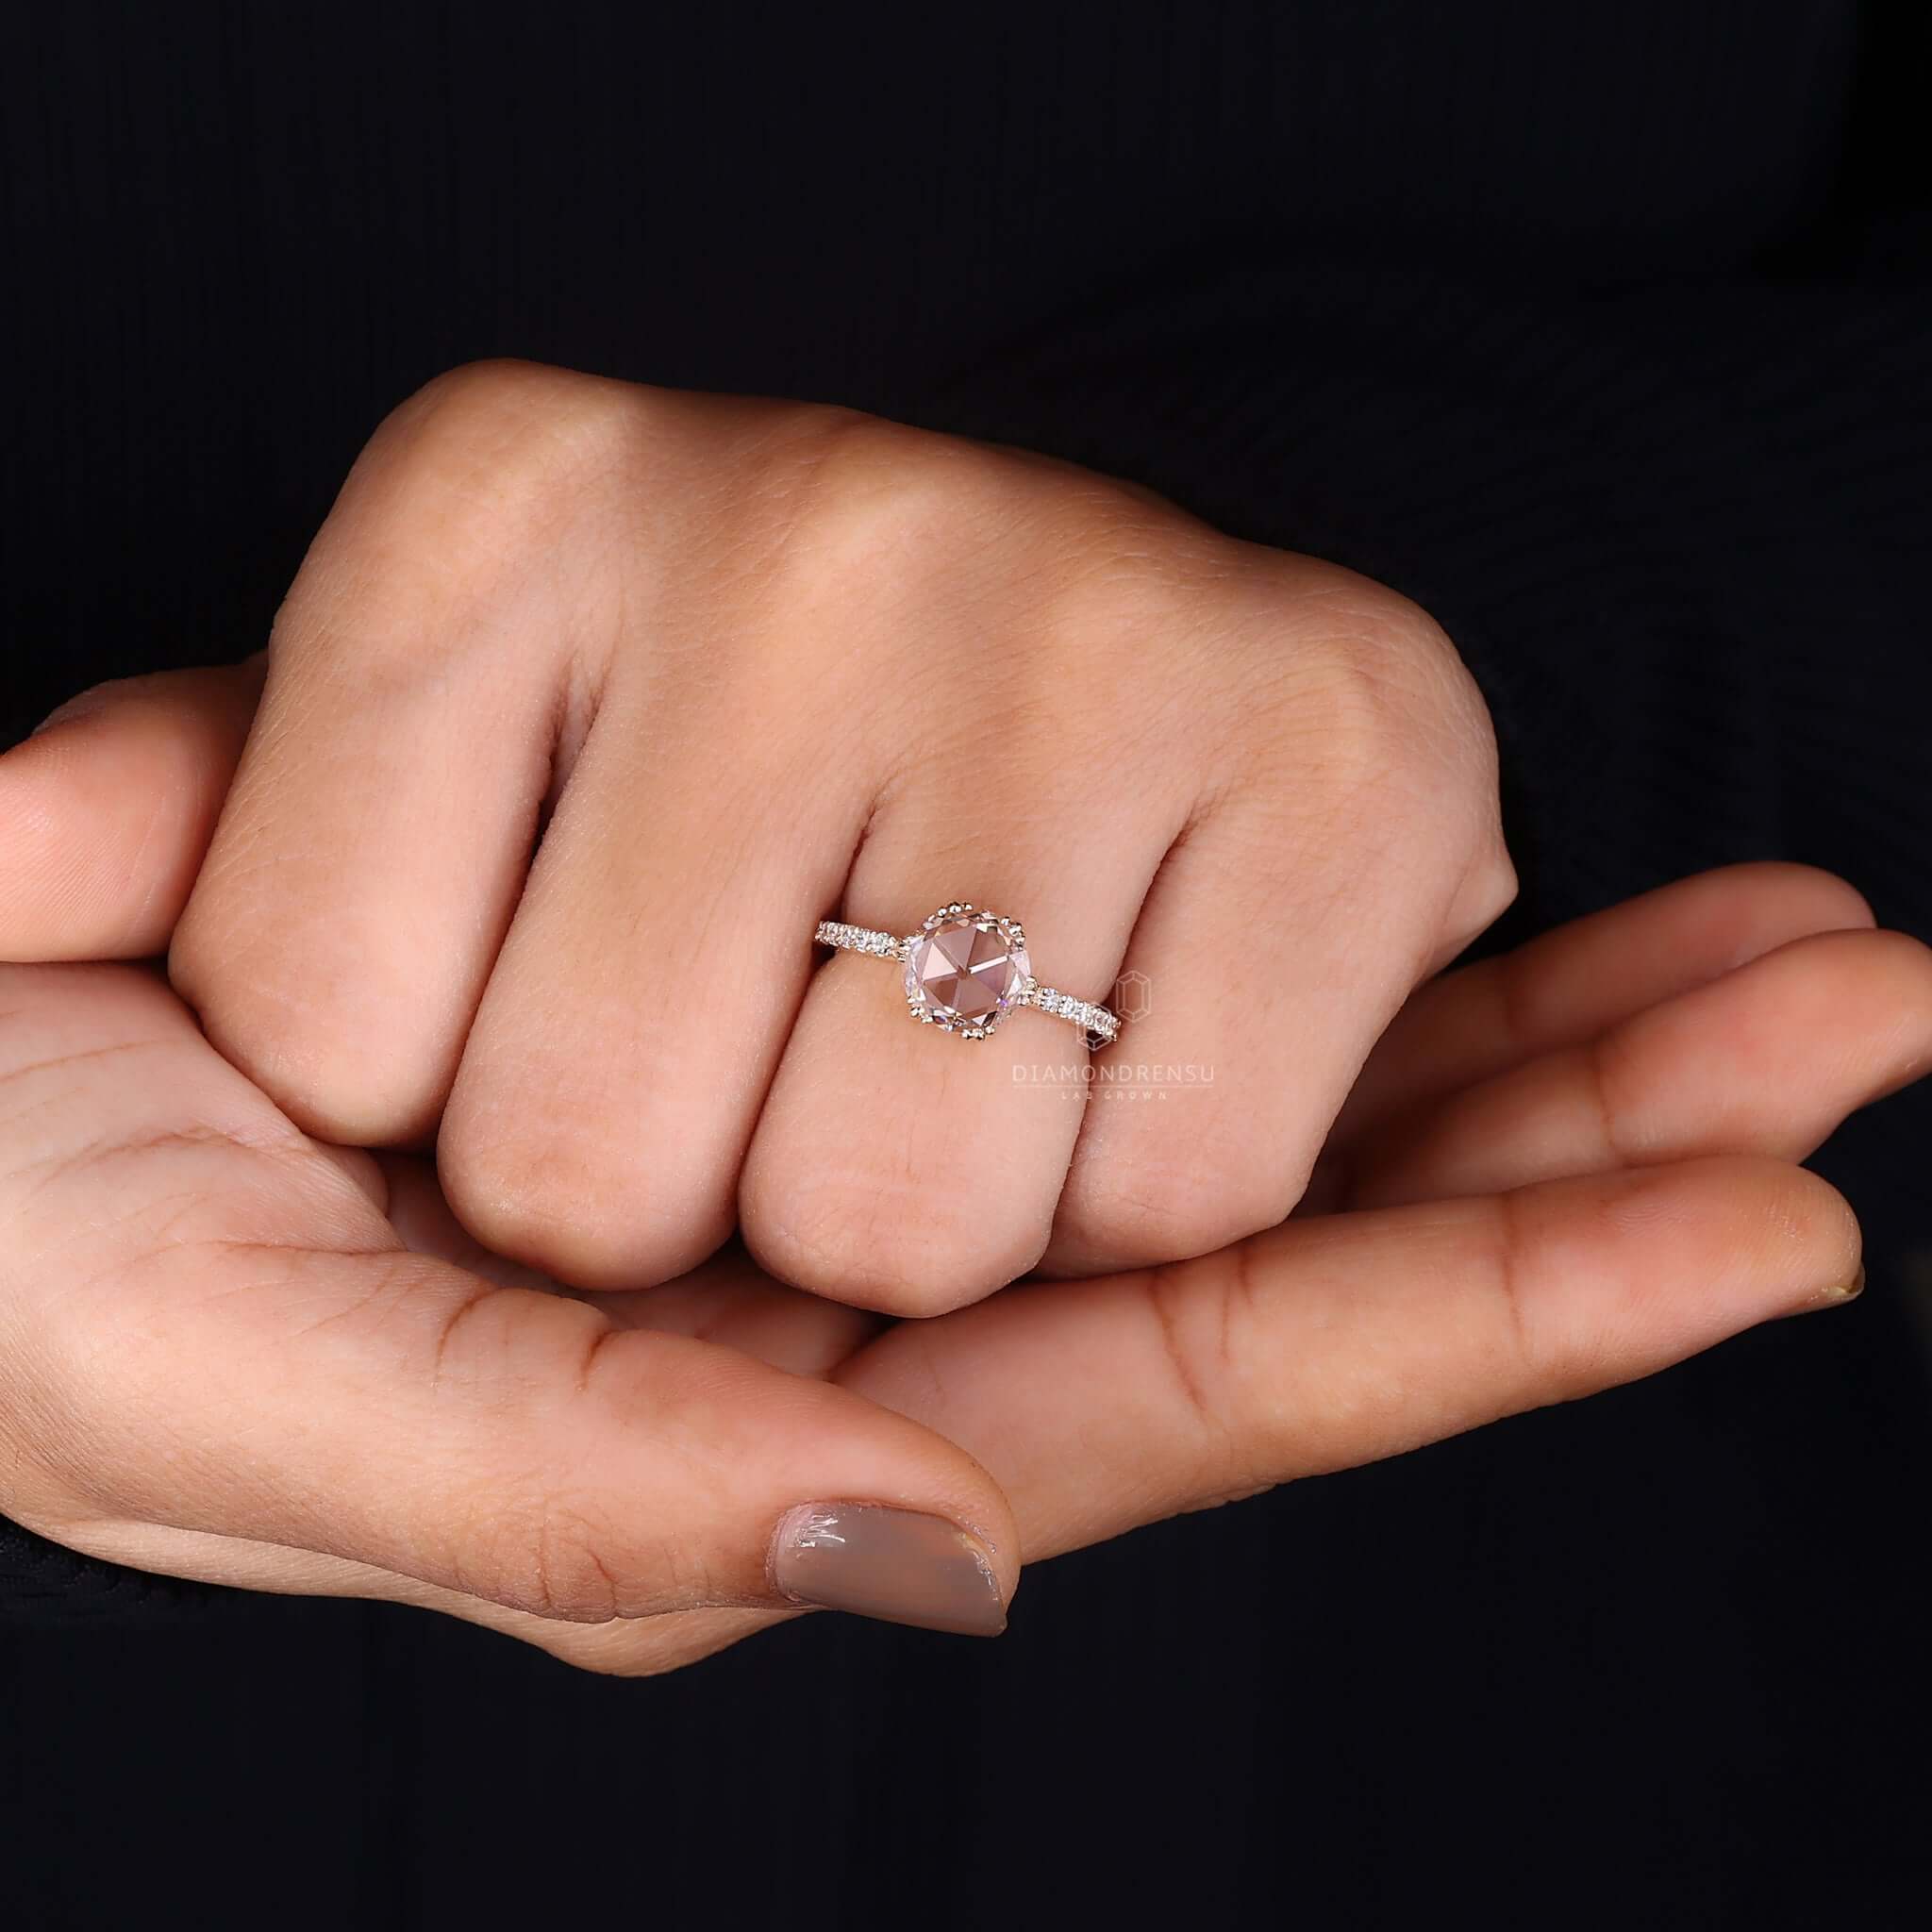 On-hand image of a lab-grown diamond engagement ring, a sustainable choice